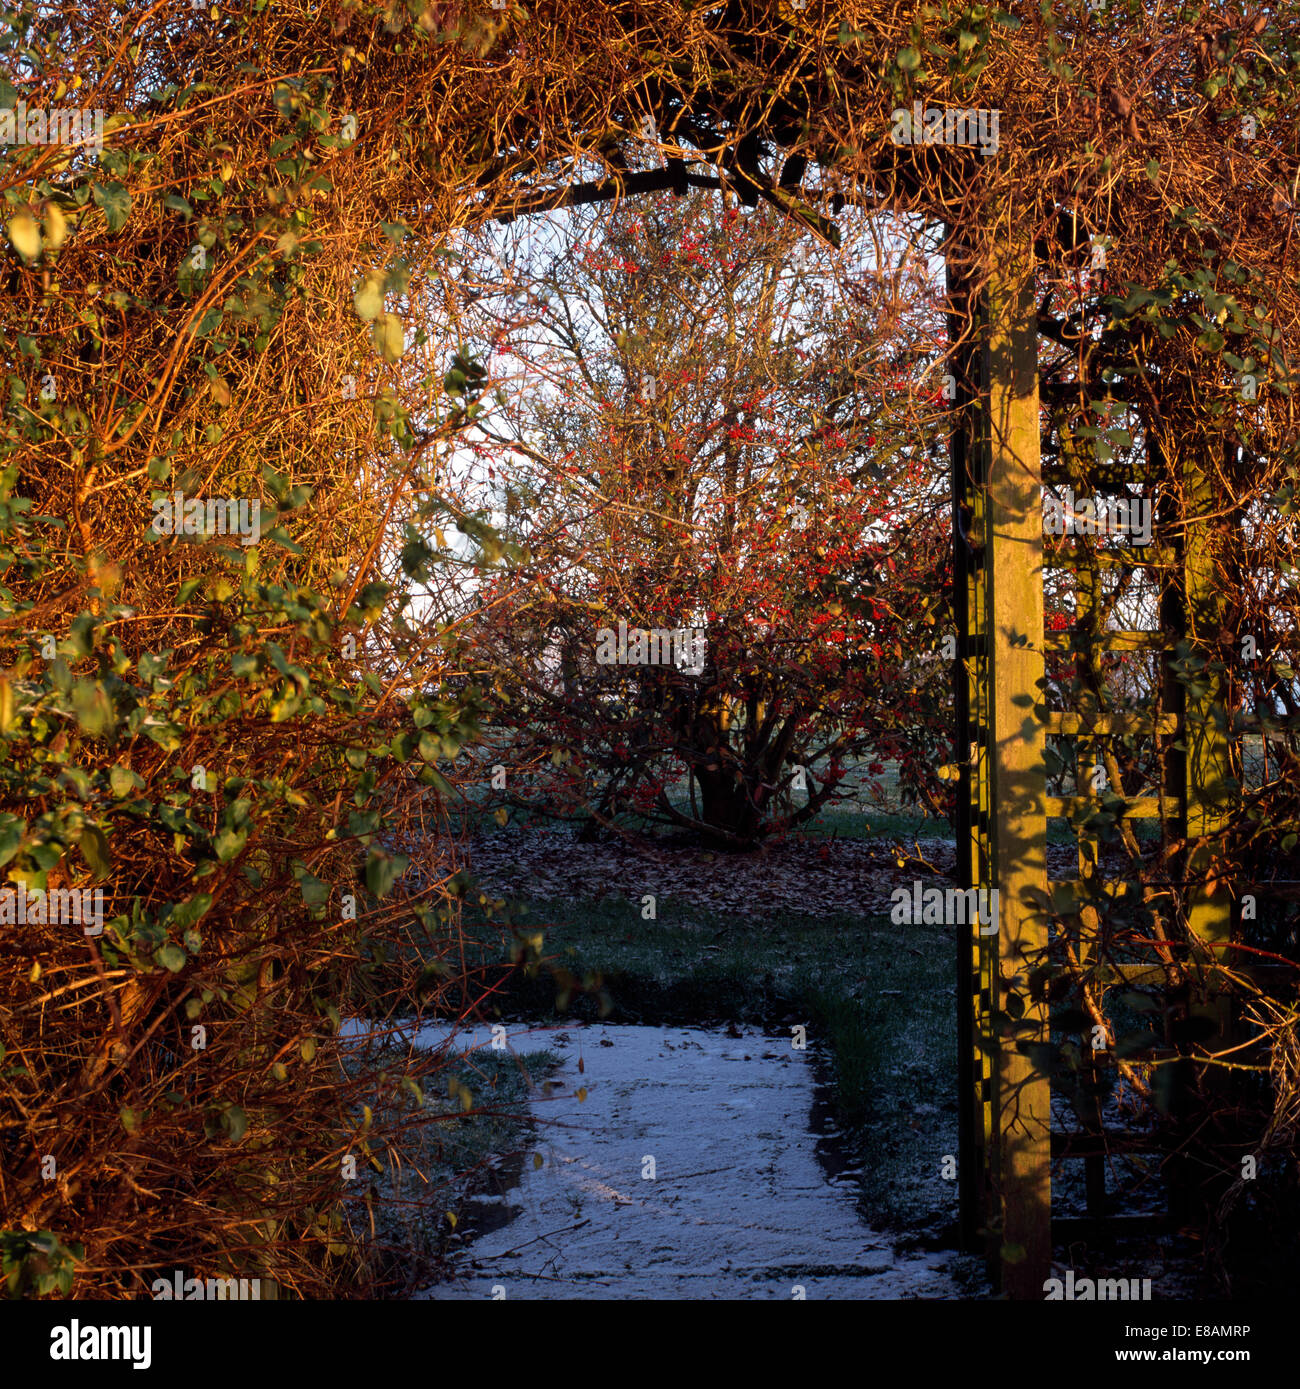 Autumn leaved climber on rustic wooden arch above frosted path in country garden Stock Photo